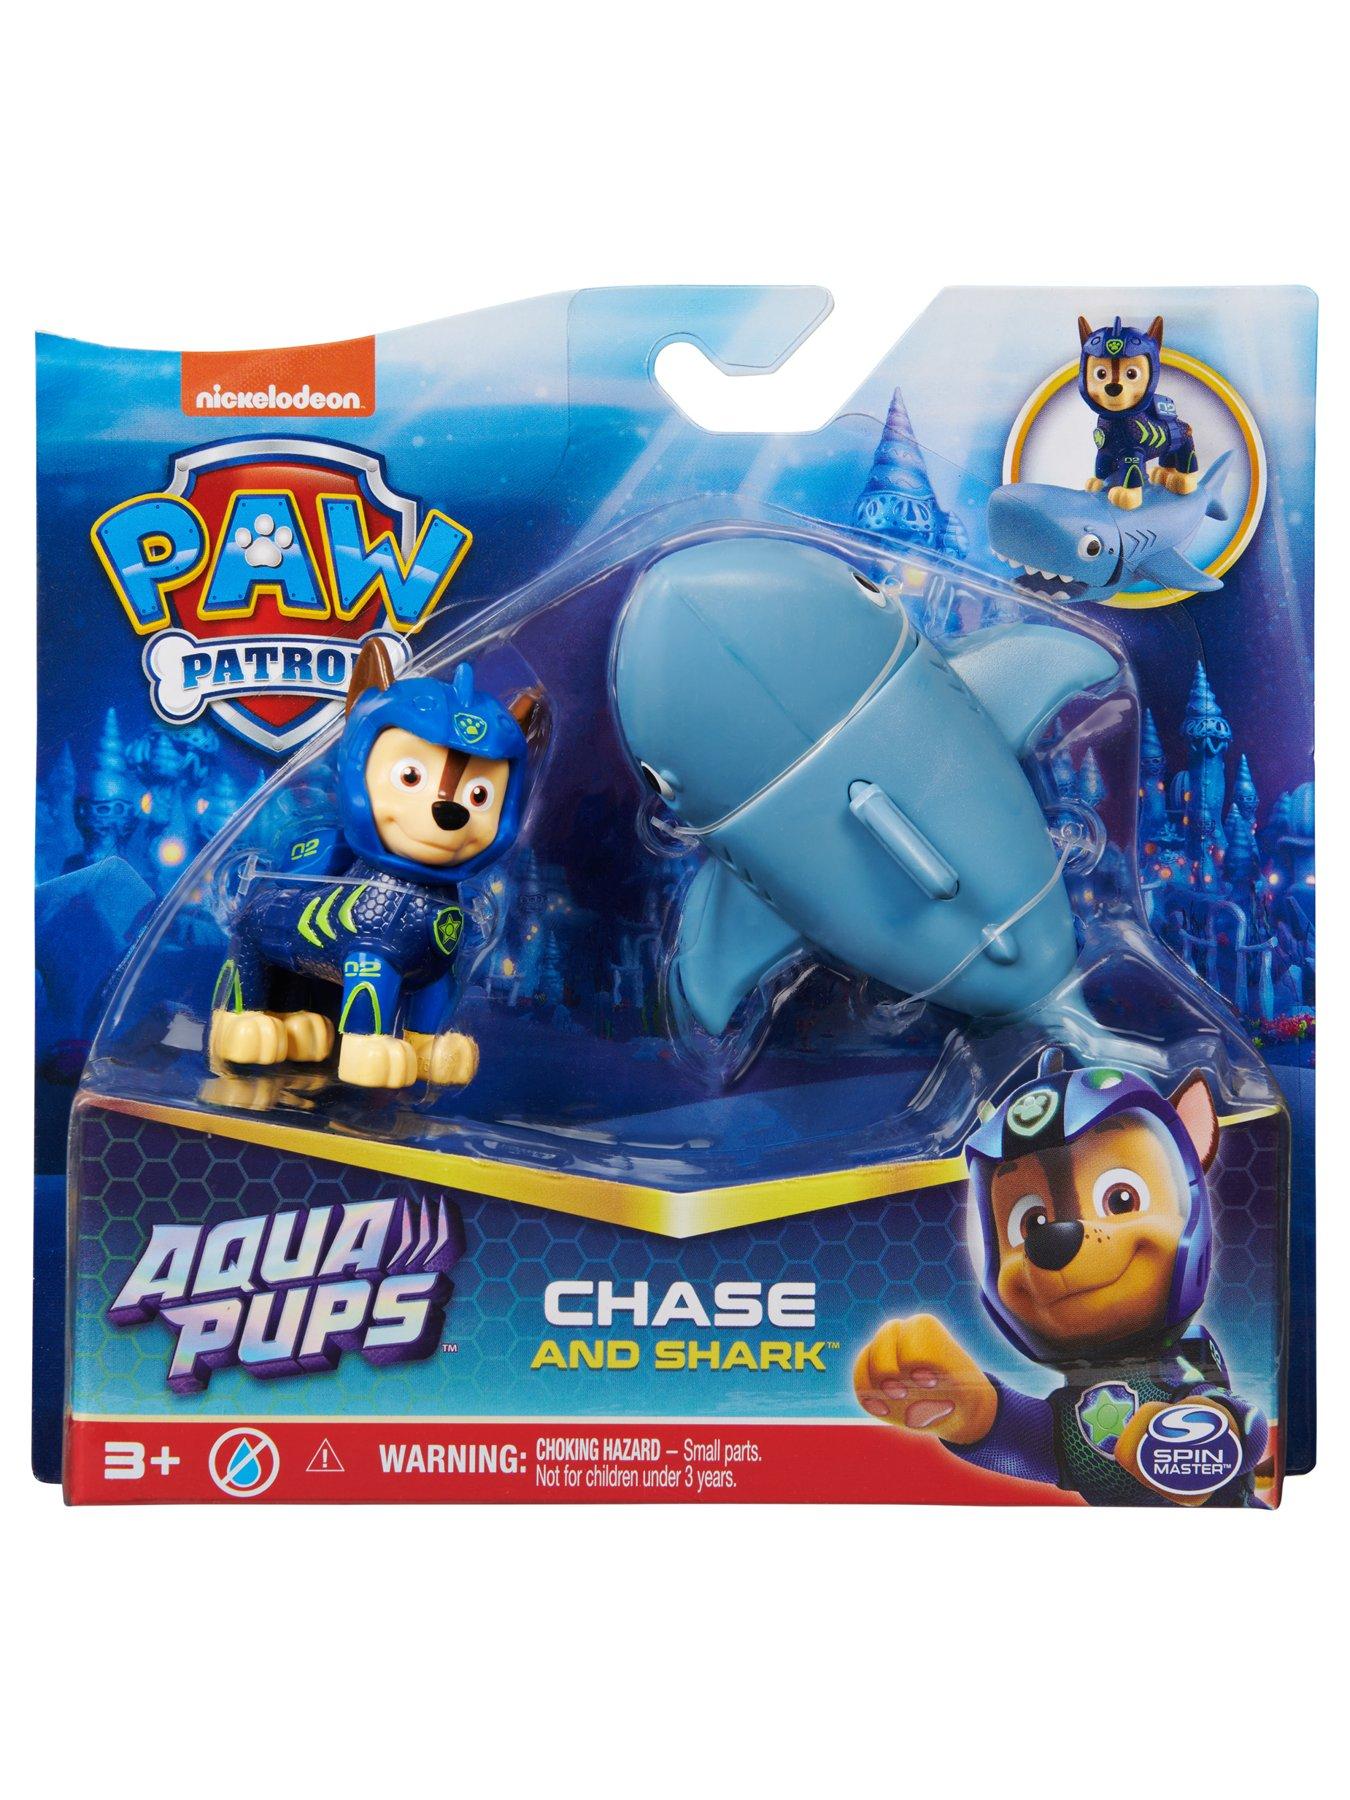  Paw Patrol, Big Truck Pups Zuma Action Figure with Clip-on  Rescue Drone, Command Center Pod and Animal Friend Kids Toys Ages 3 and up  : Toys & Games